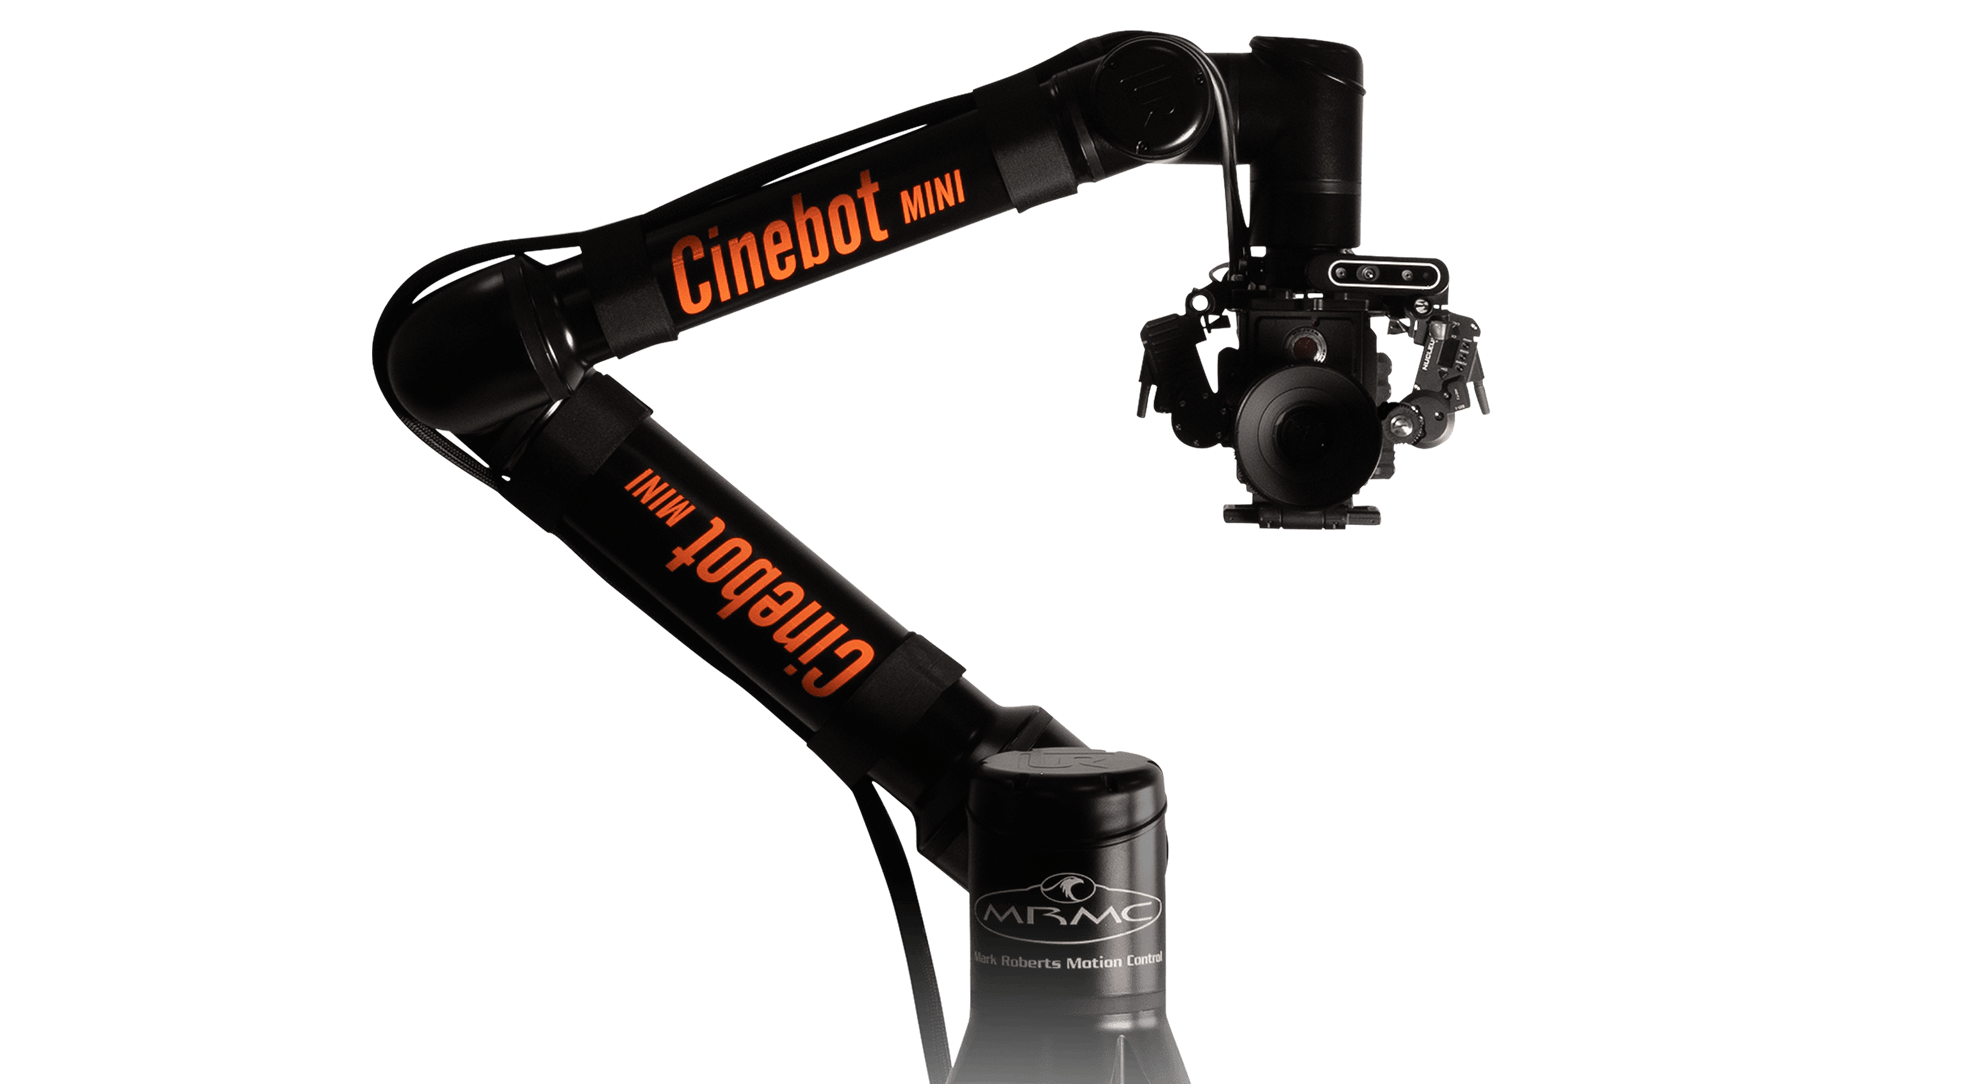 Cinebot Mini | The Most Portable, User-friendly Mocobot Ever!